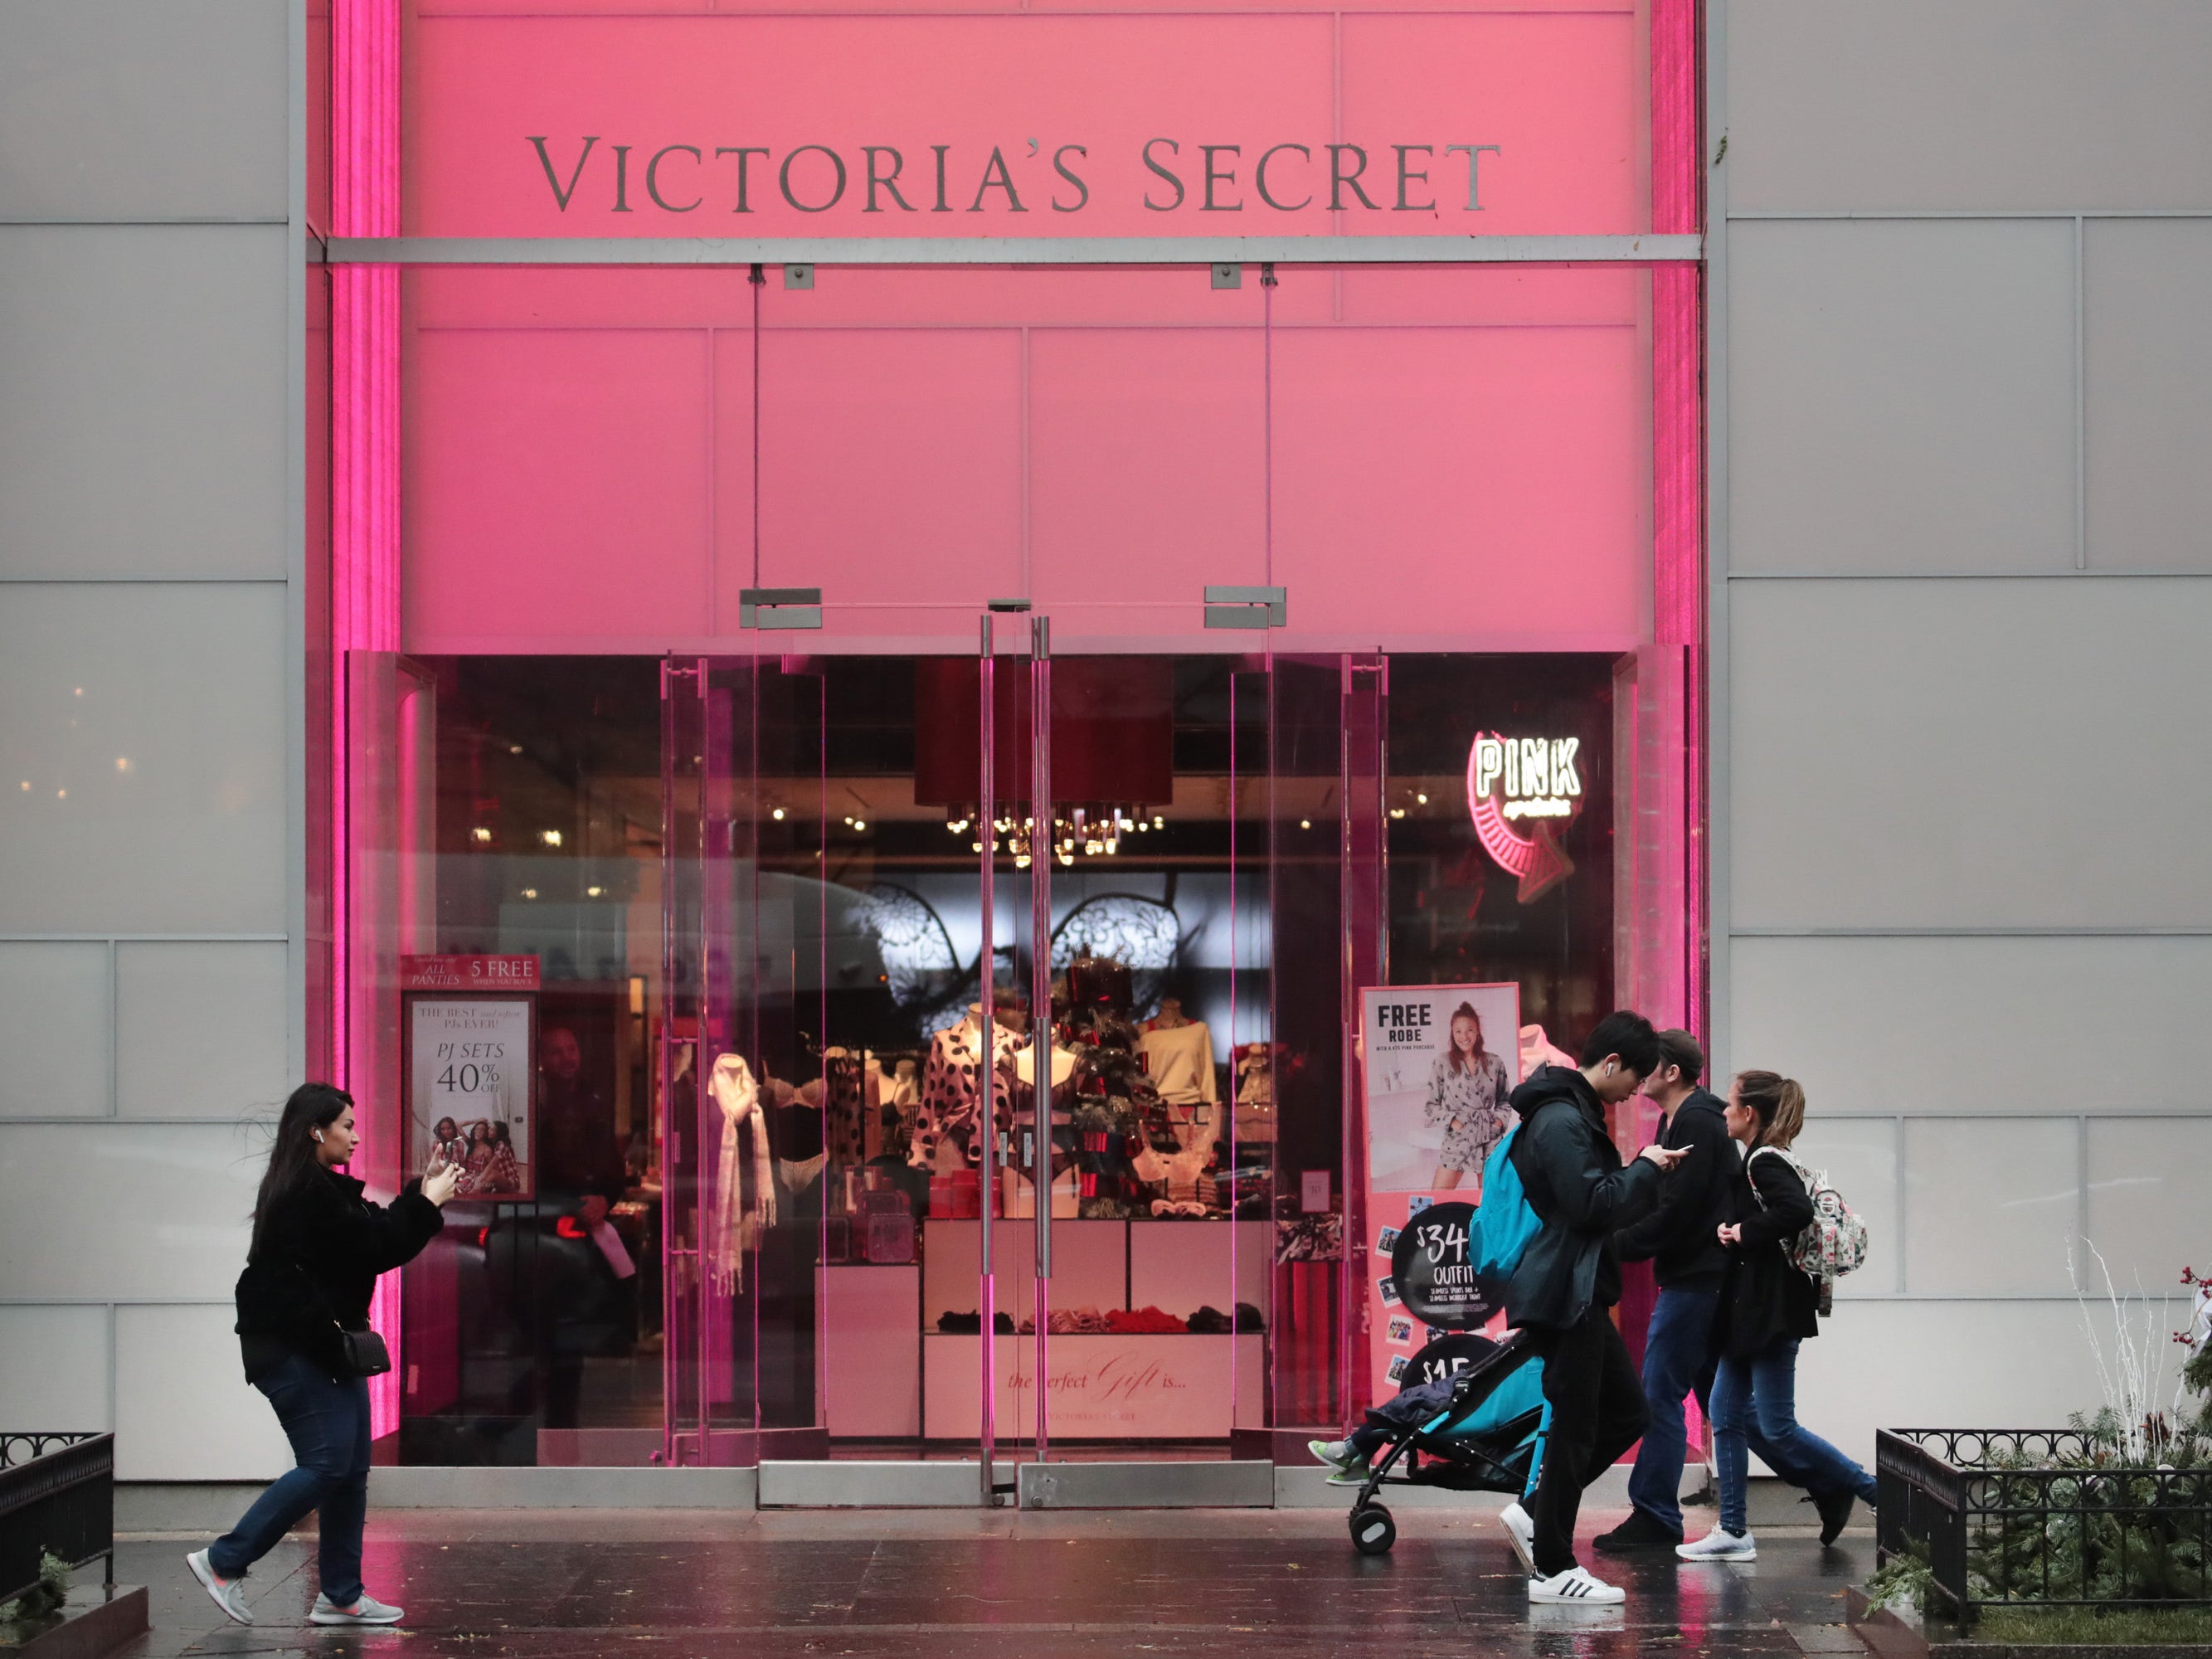 Victoria's Secret and Pink Look 'Desperate' With Promotions